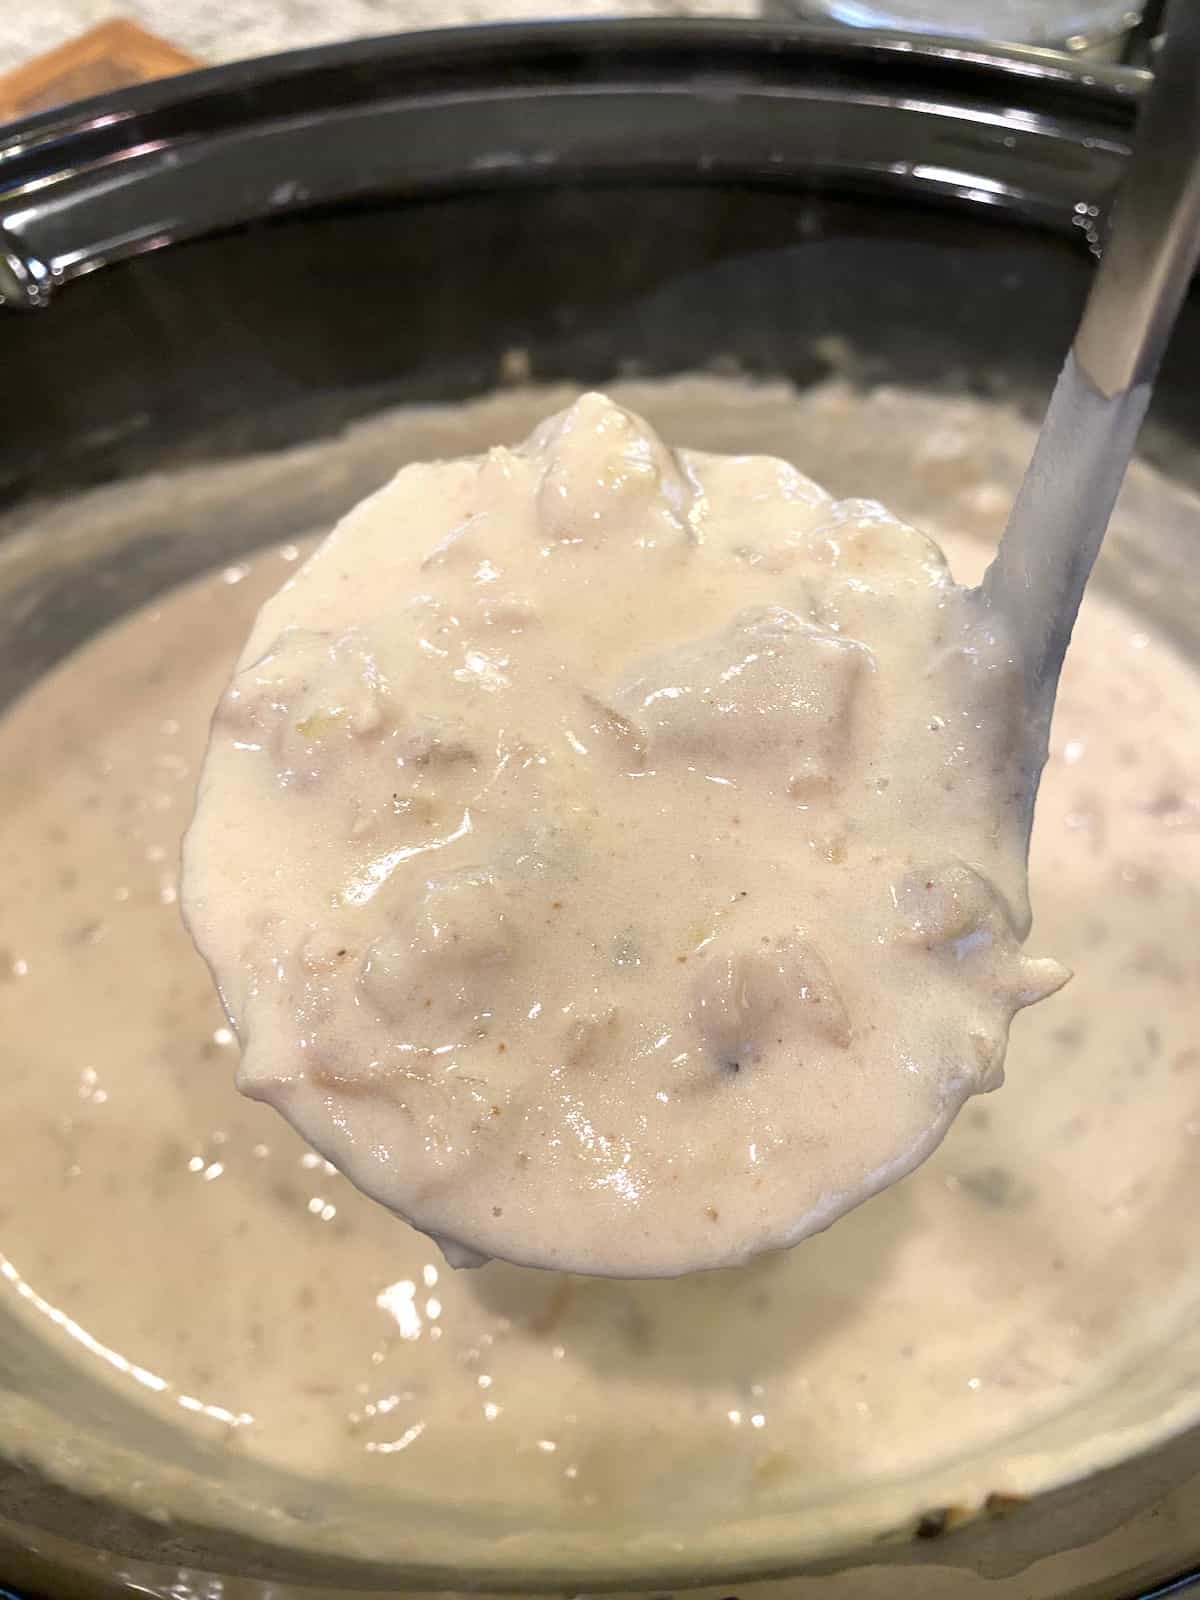 A scoop full of clam chowder.